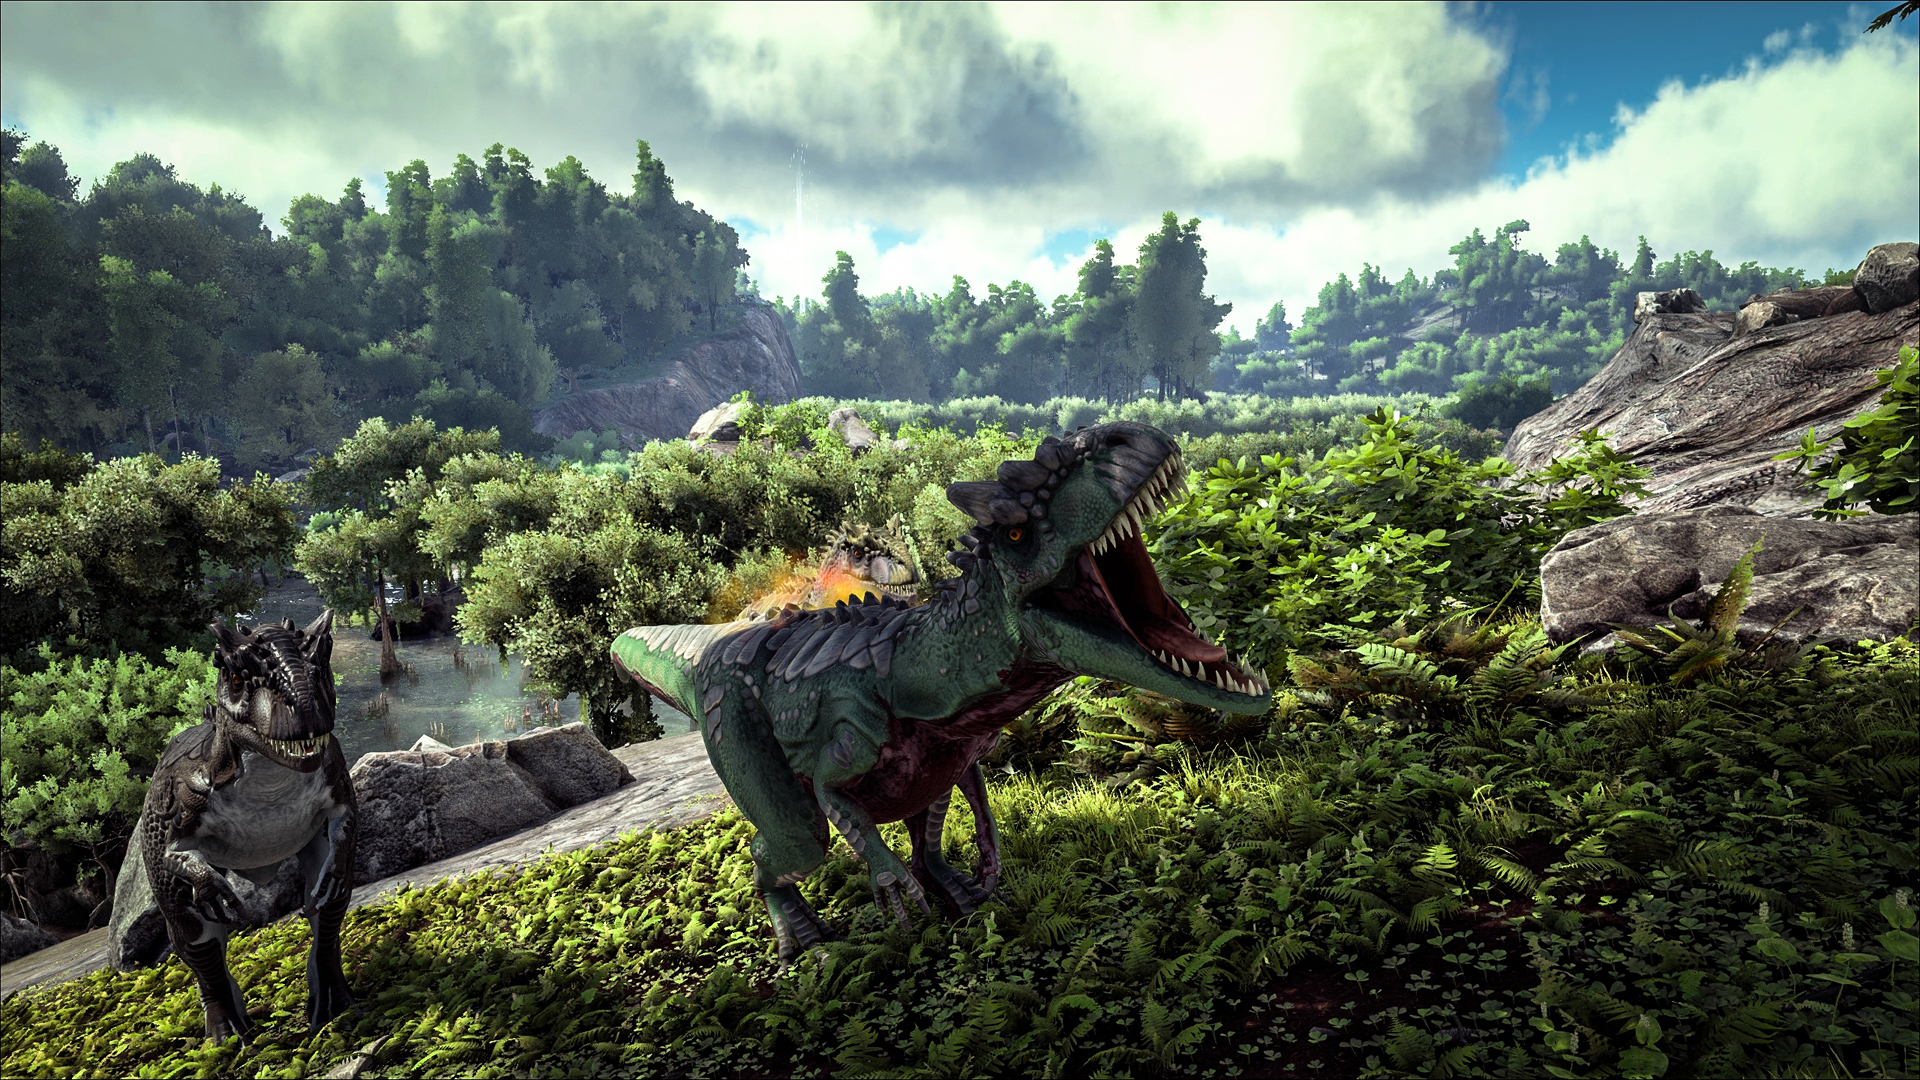 Download wallpaper 2560x1440 pandora nature ark survival evolved game  dual wide 169 2560x1440 hd background 4692